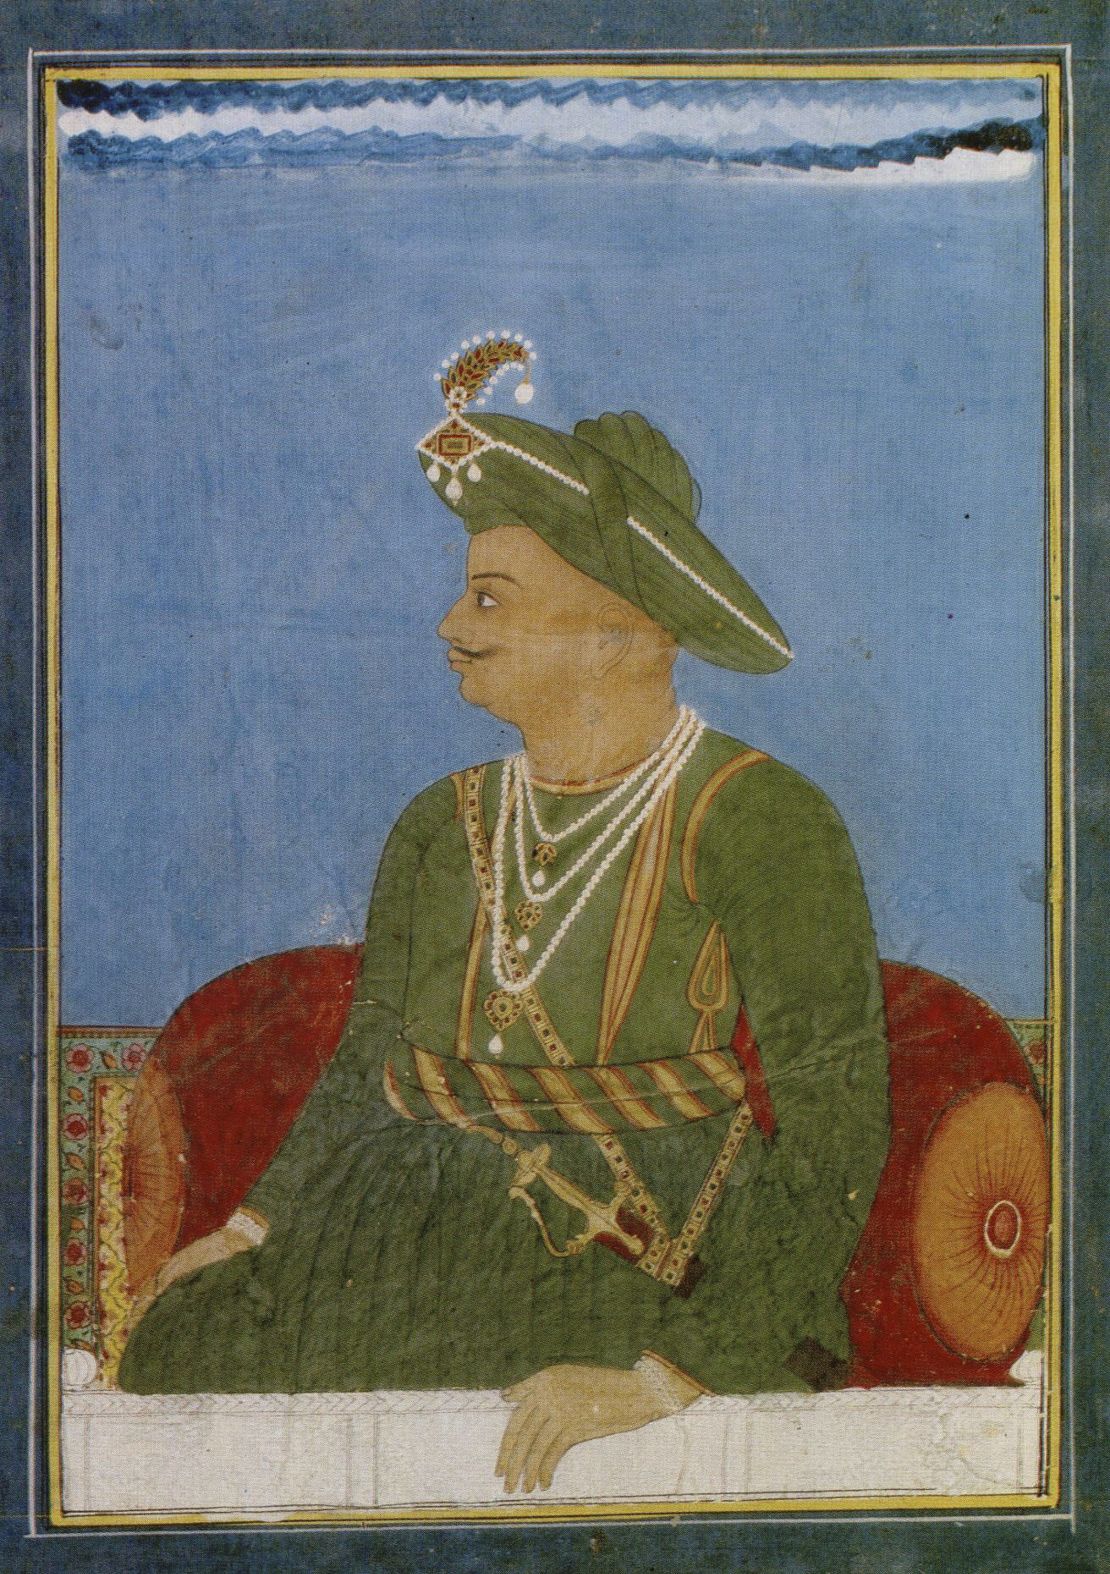 Tipu Sultan was killed by British forces on May 4, 1799.